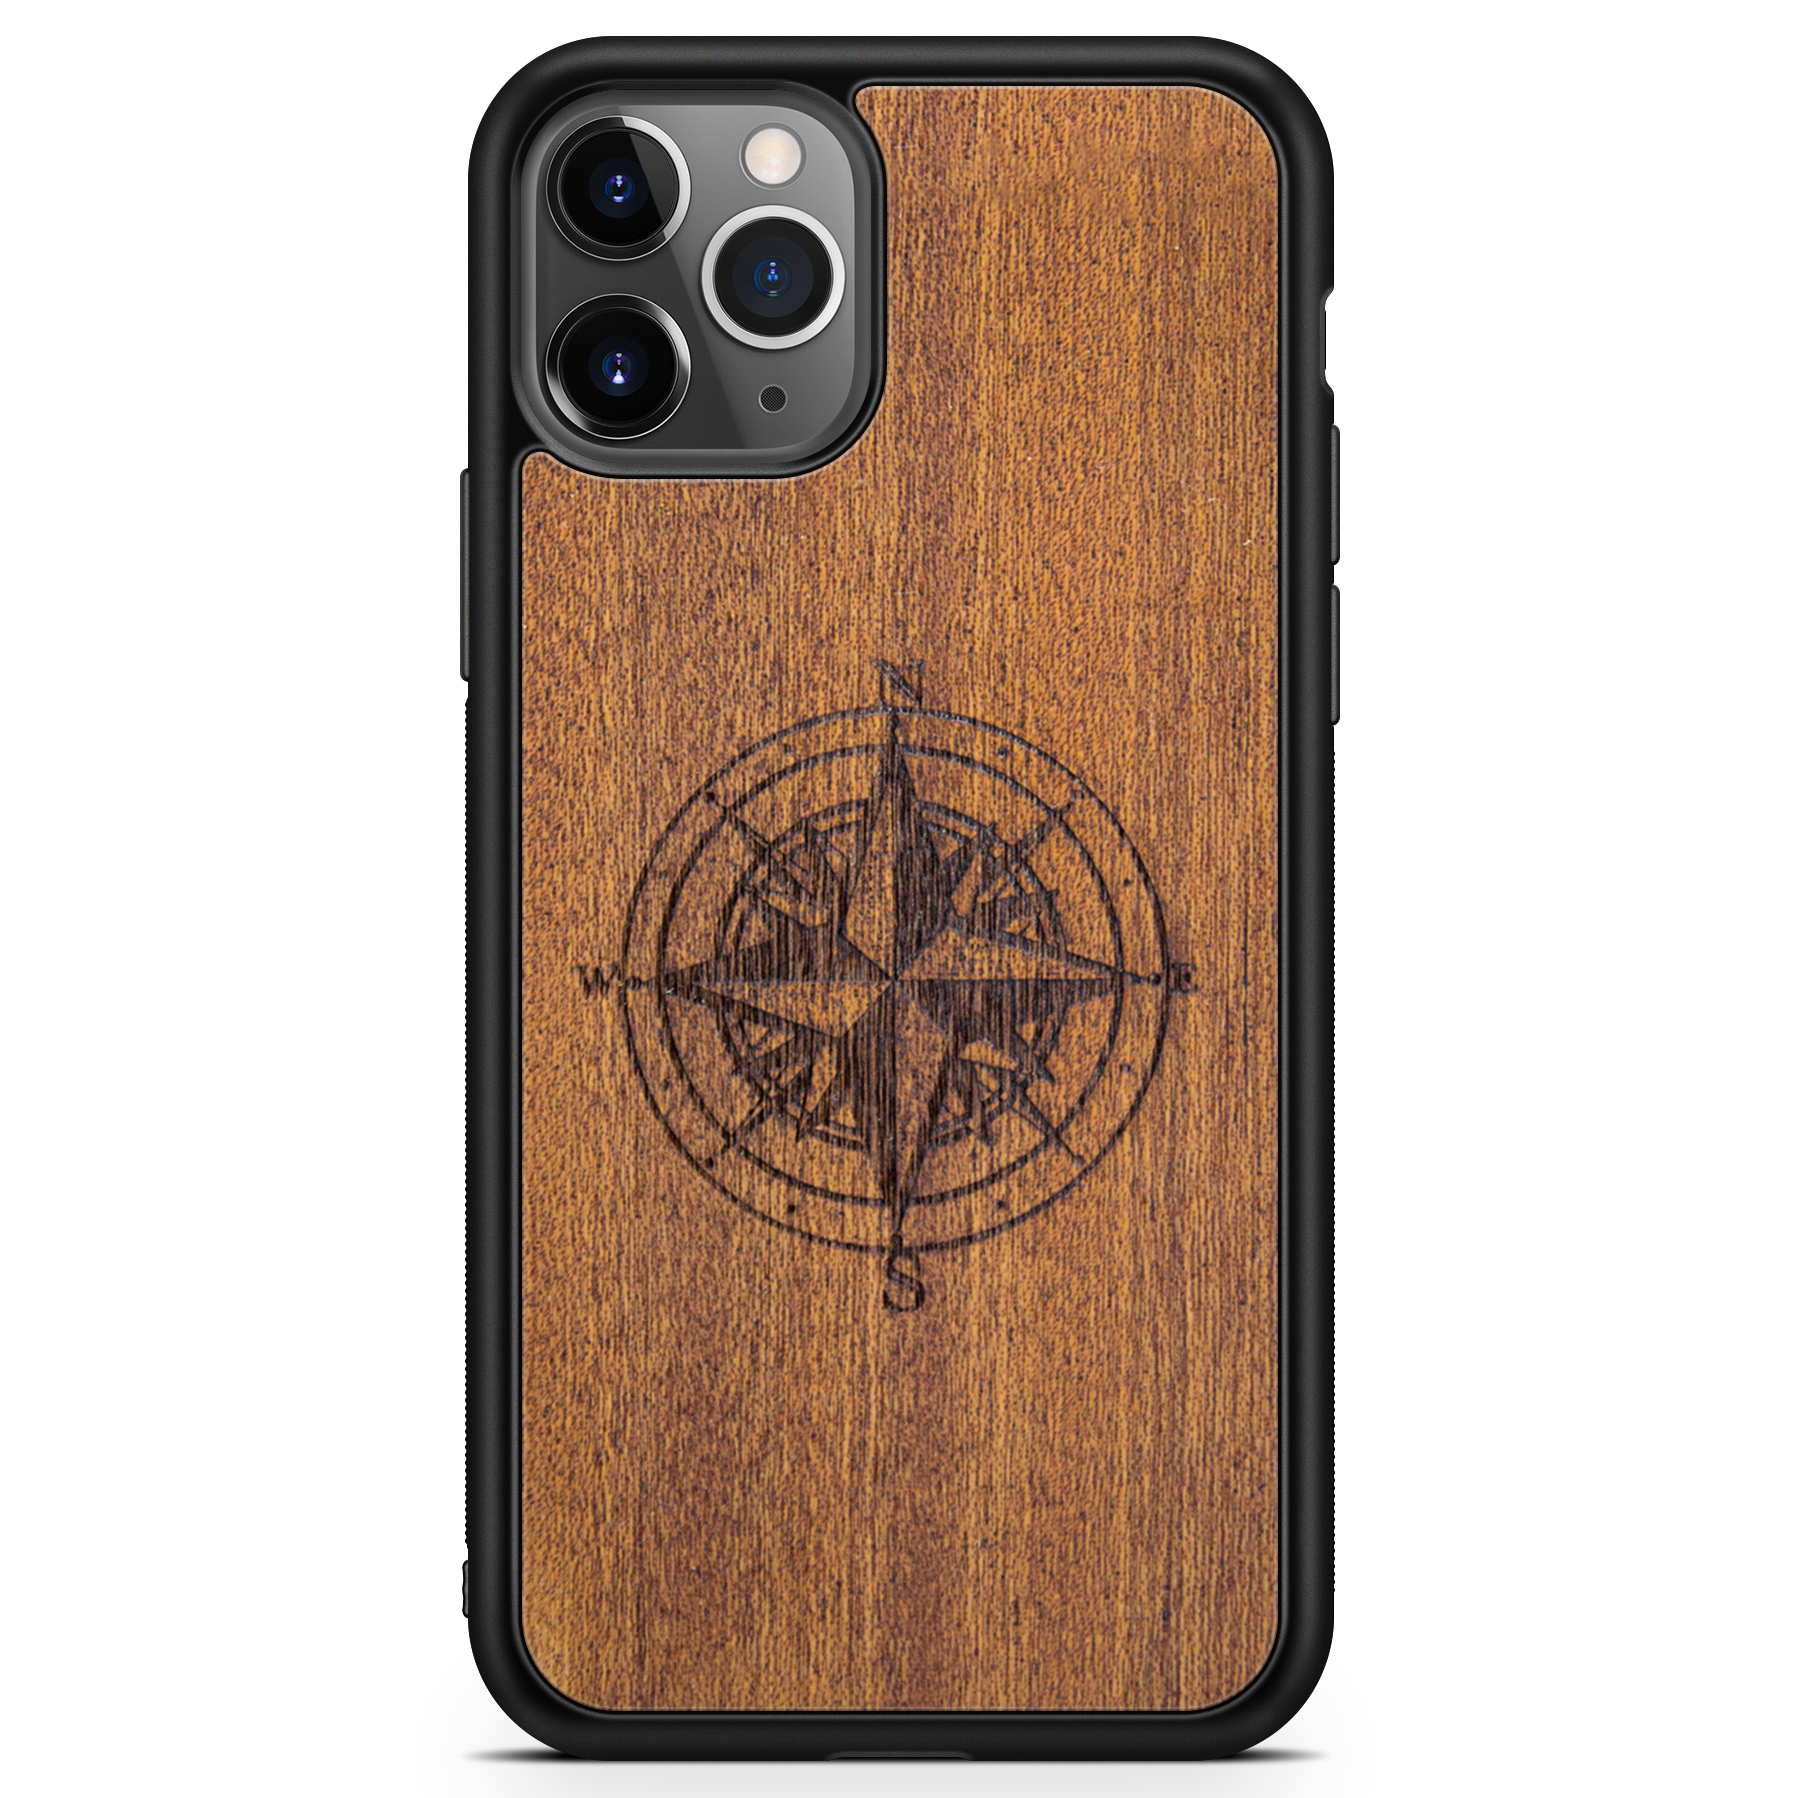 Compass Engraved Wooden iPhone, Samsung, Huawei Cases